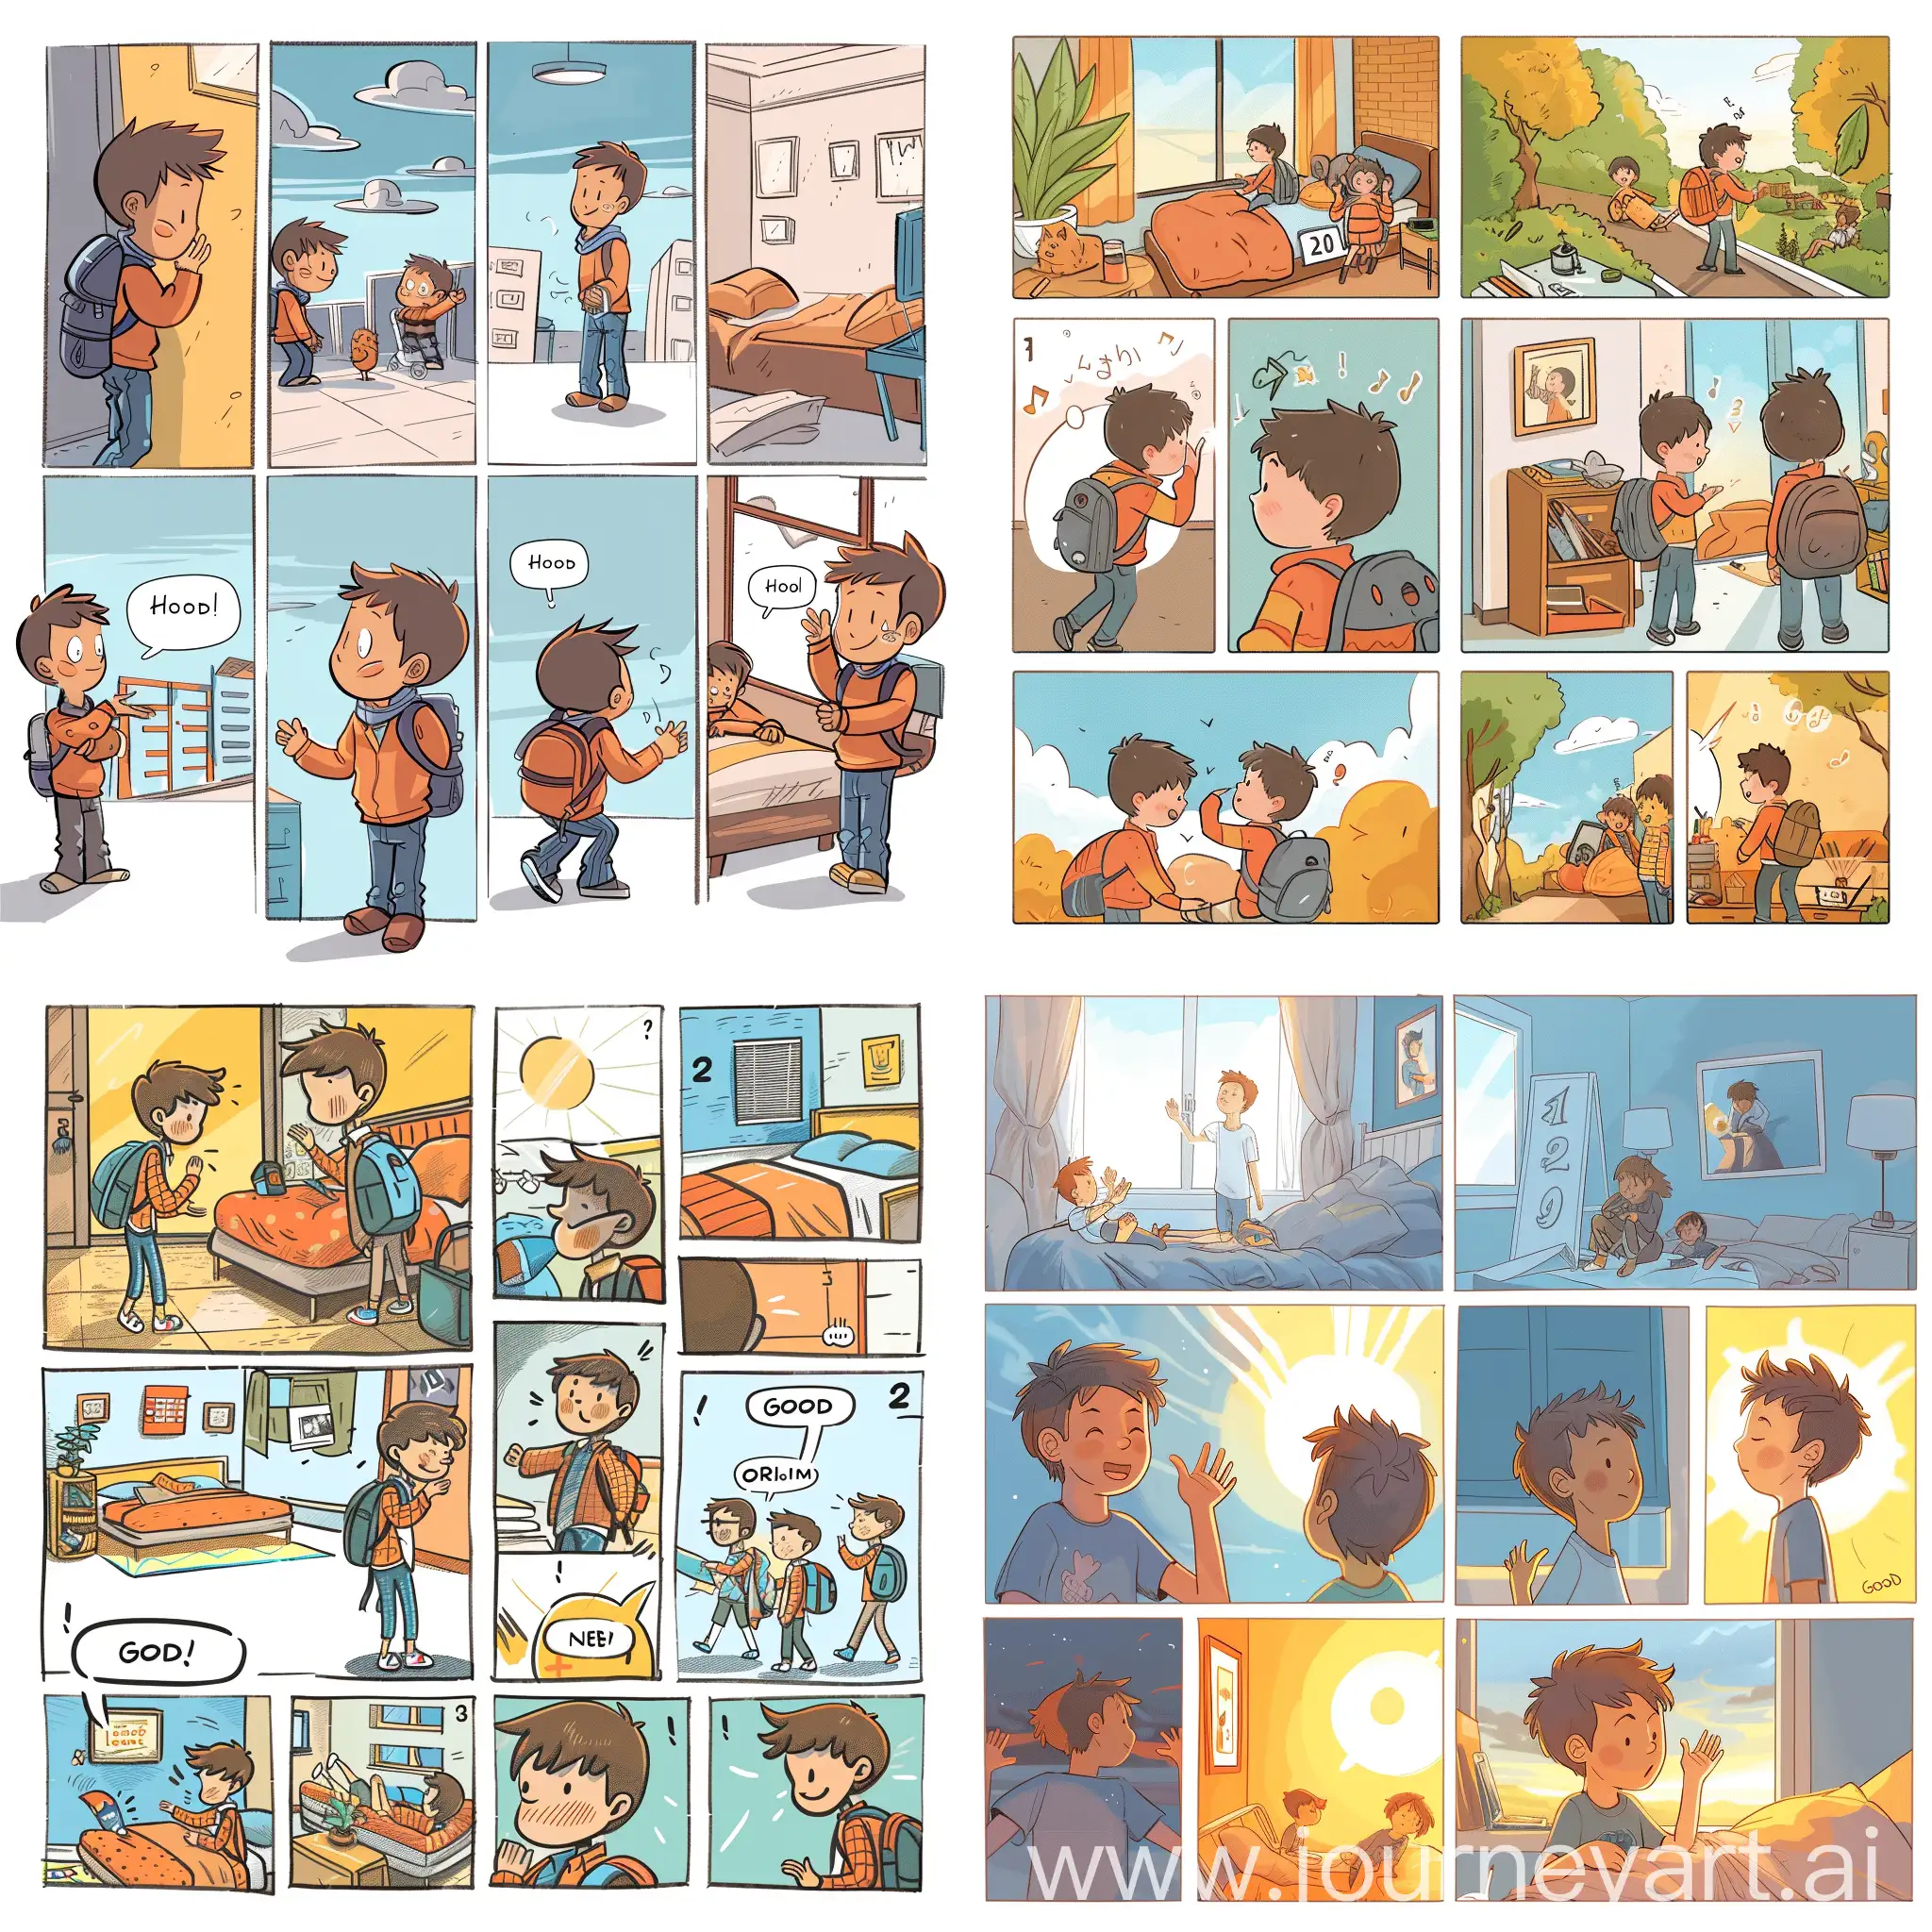  complete comic story with th e folloiwng scenes: 1. a boy waking up saying good morning 2. a boy meeting his friends at school saying hello 3. a boy leaving schools saying goodbye to his friends 4. a boy gooing to sleep saying good night